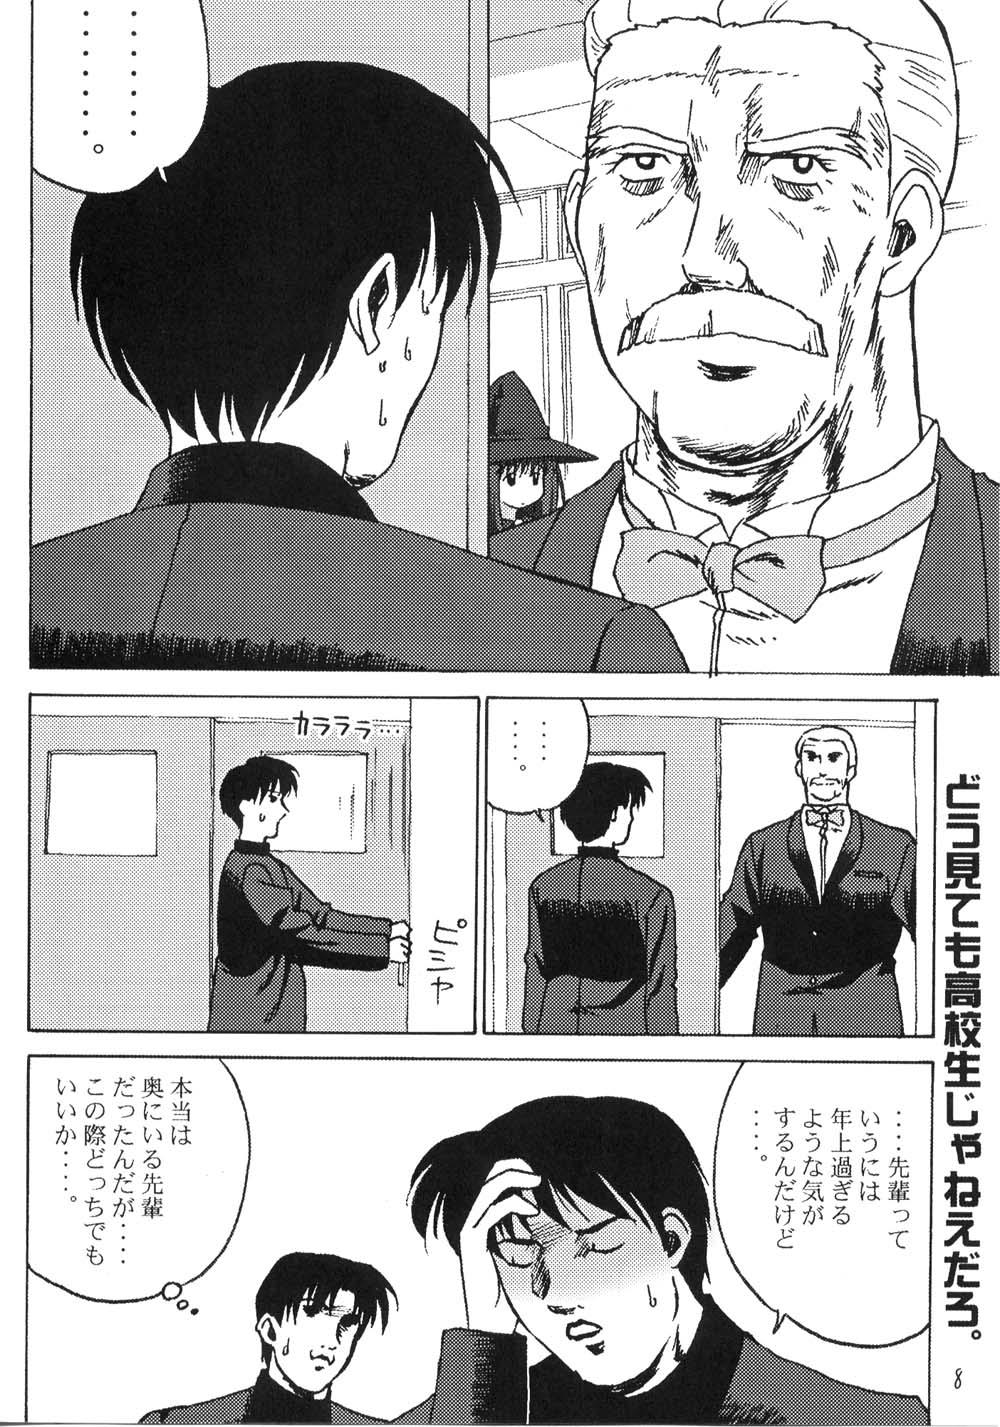 Gaygroup Credit Note Vol. 5 - To heart Comic party Kizuato Sex Party - Page 7